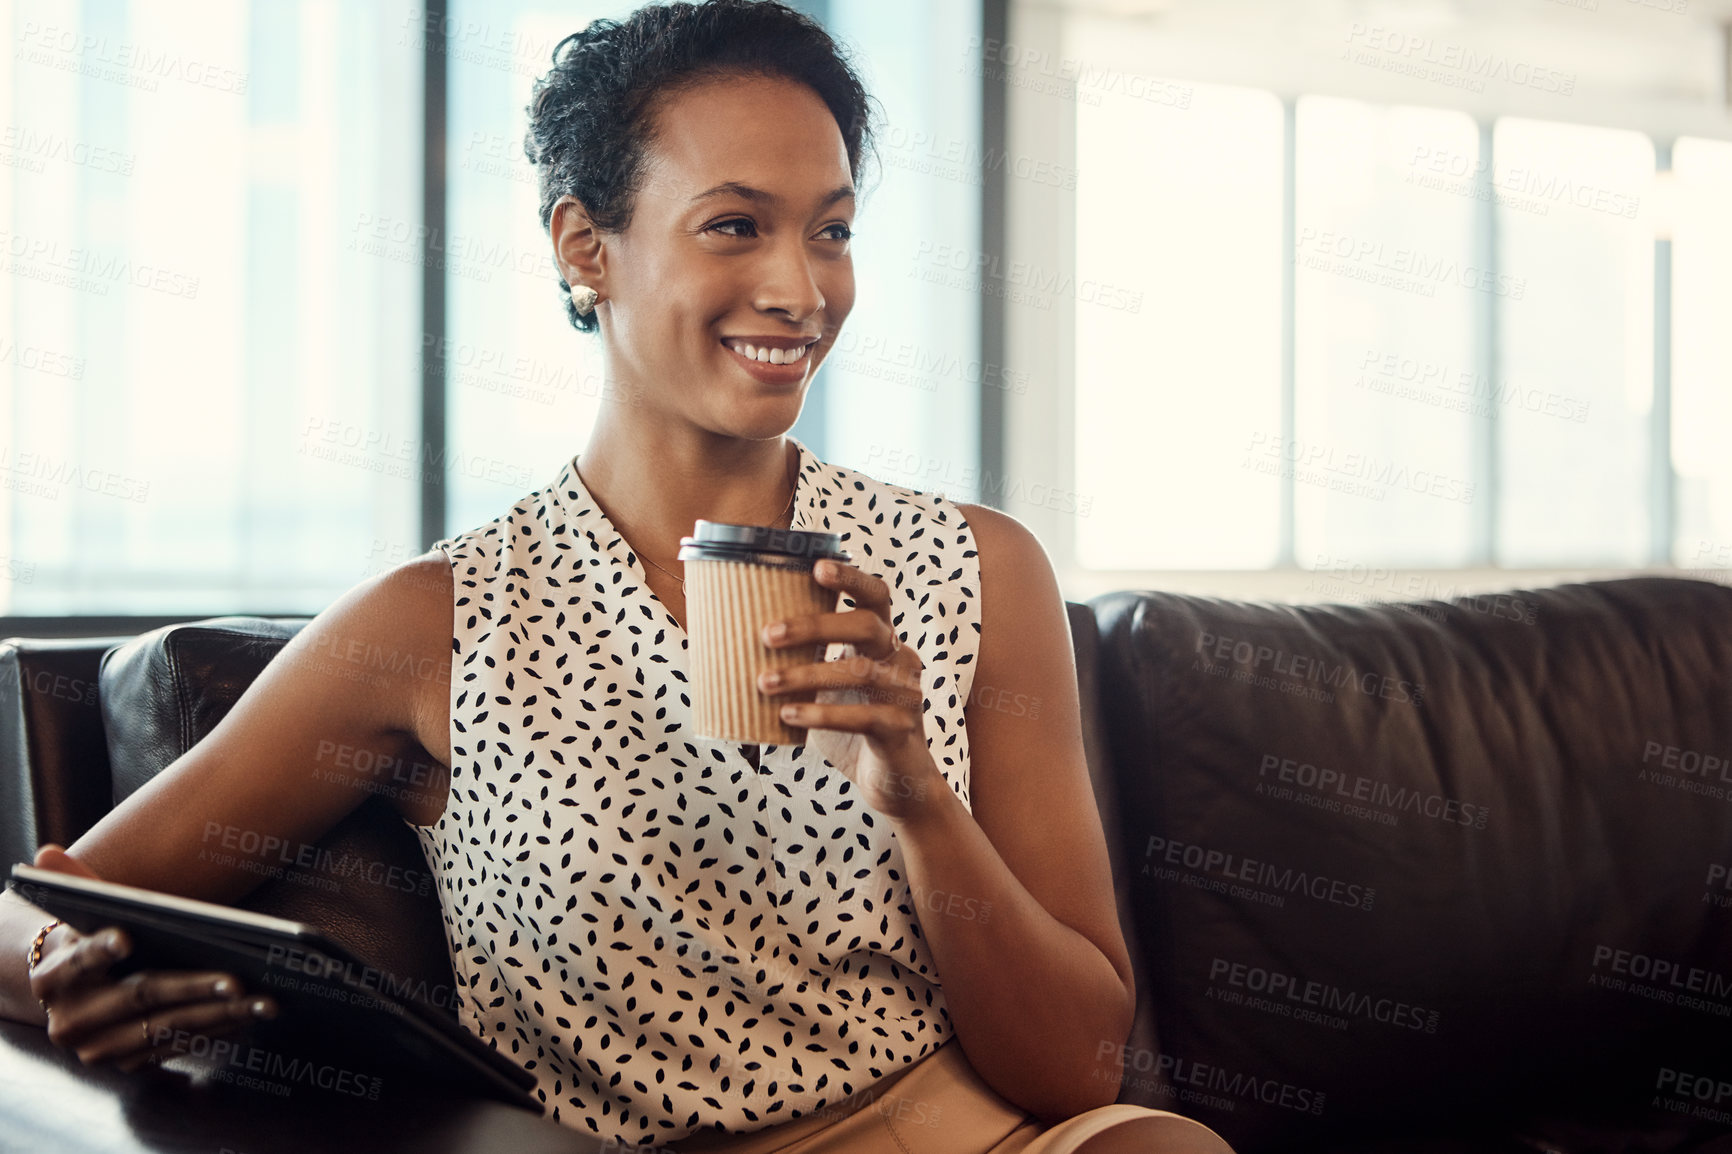 Buy stock photo Shot of a young businesswoman drinking coffee and using a digital tablet while sitting on a couch in her office